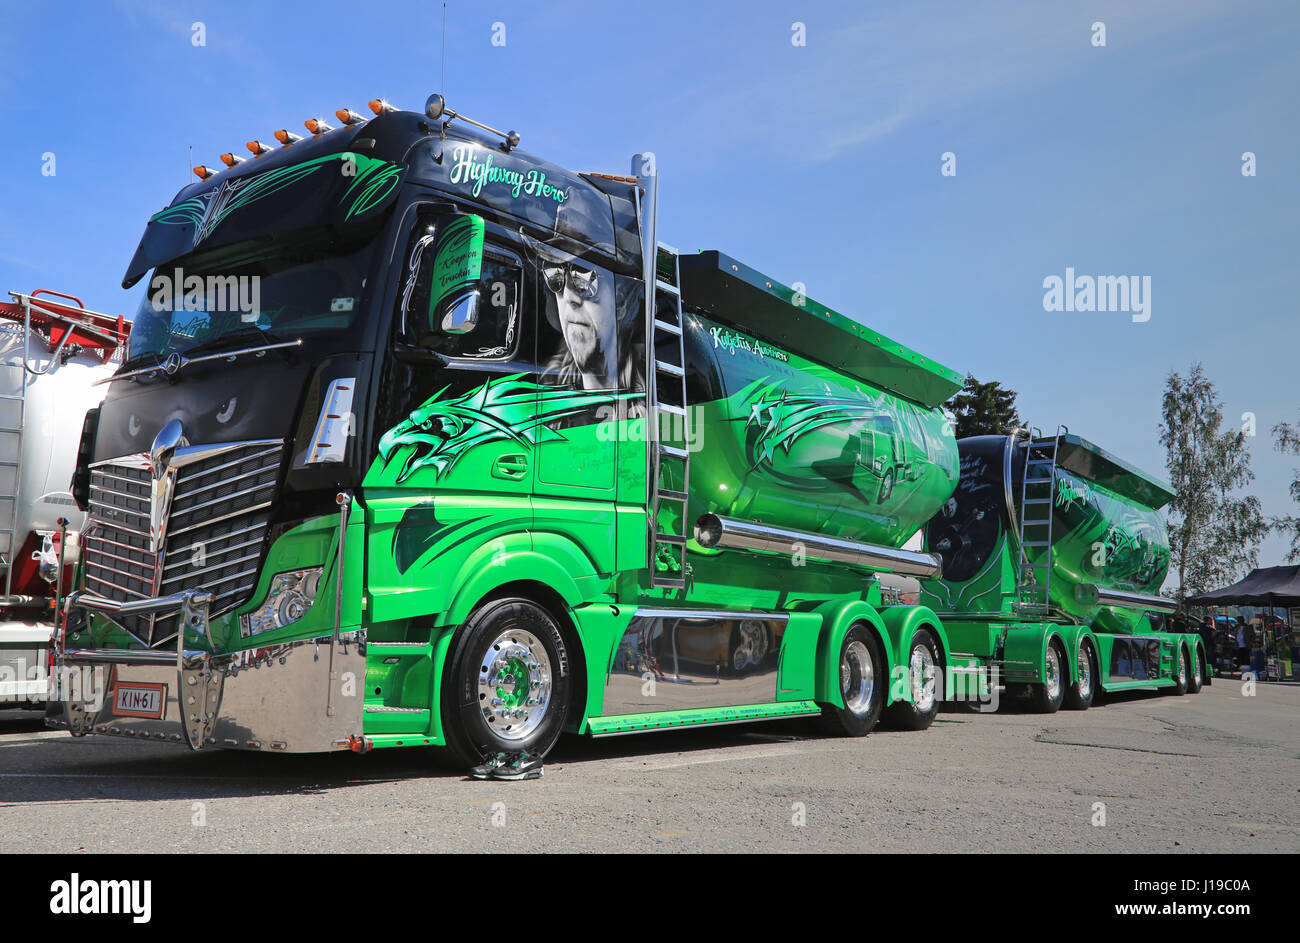 PORVOO, FINLAND - JULY 2, 2016: Super truck Mercedes-Benz Actros 2551 Highway Hero owned by Kuljetus Auvinen Oy and matching trucking shoes on Riversi Stock Photo